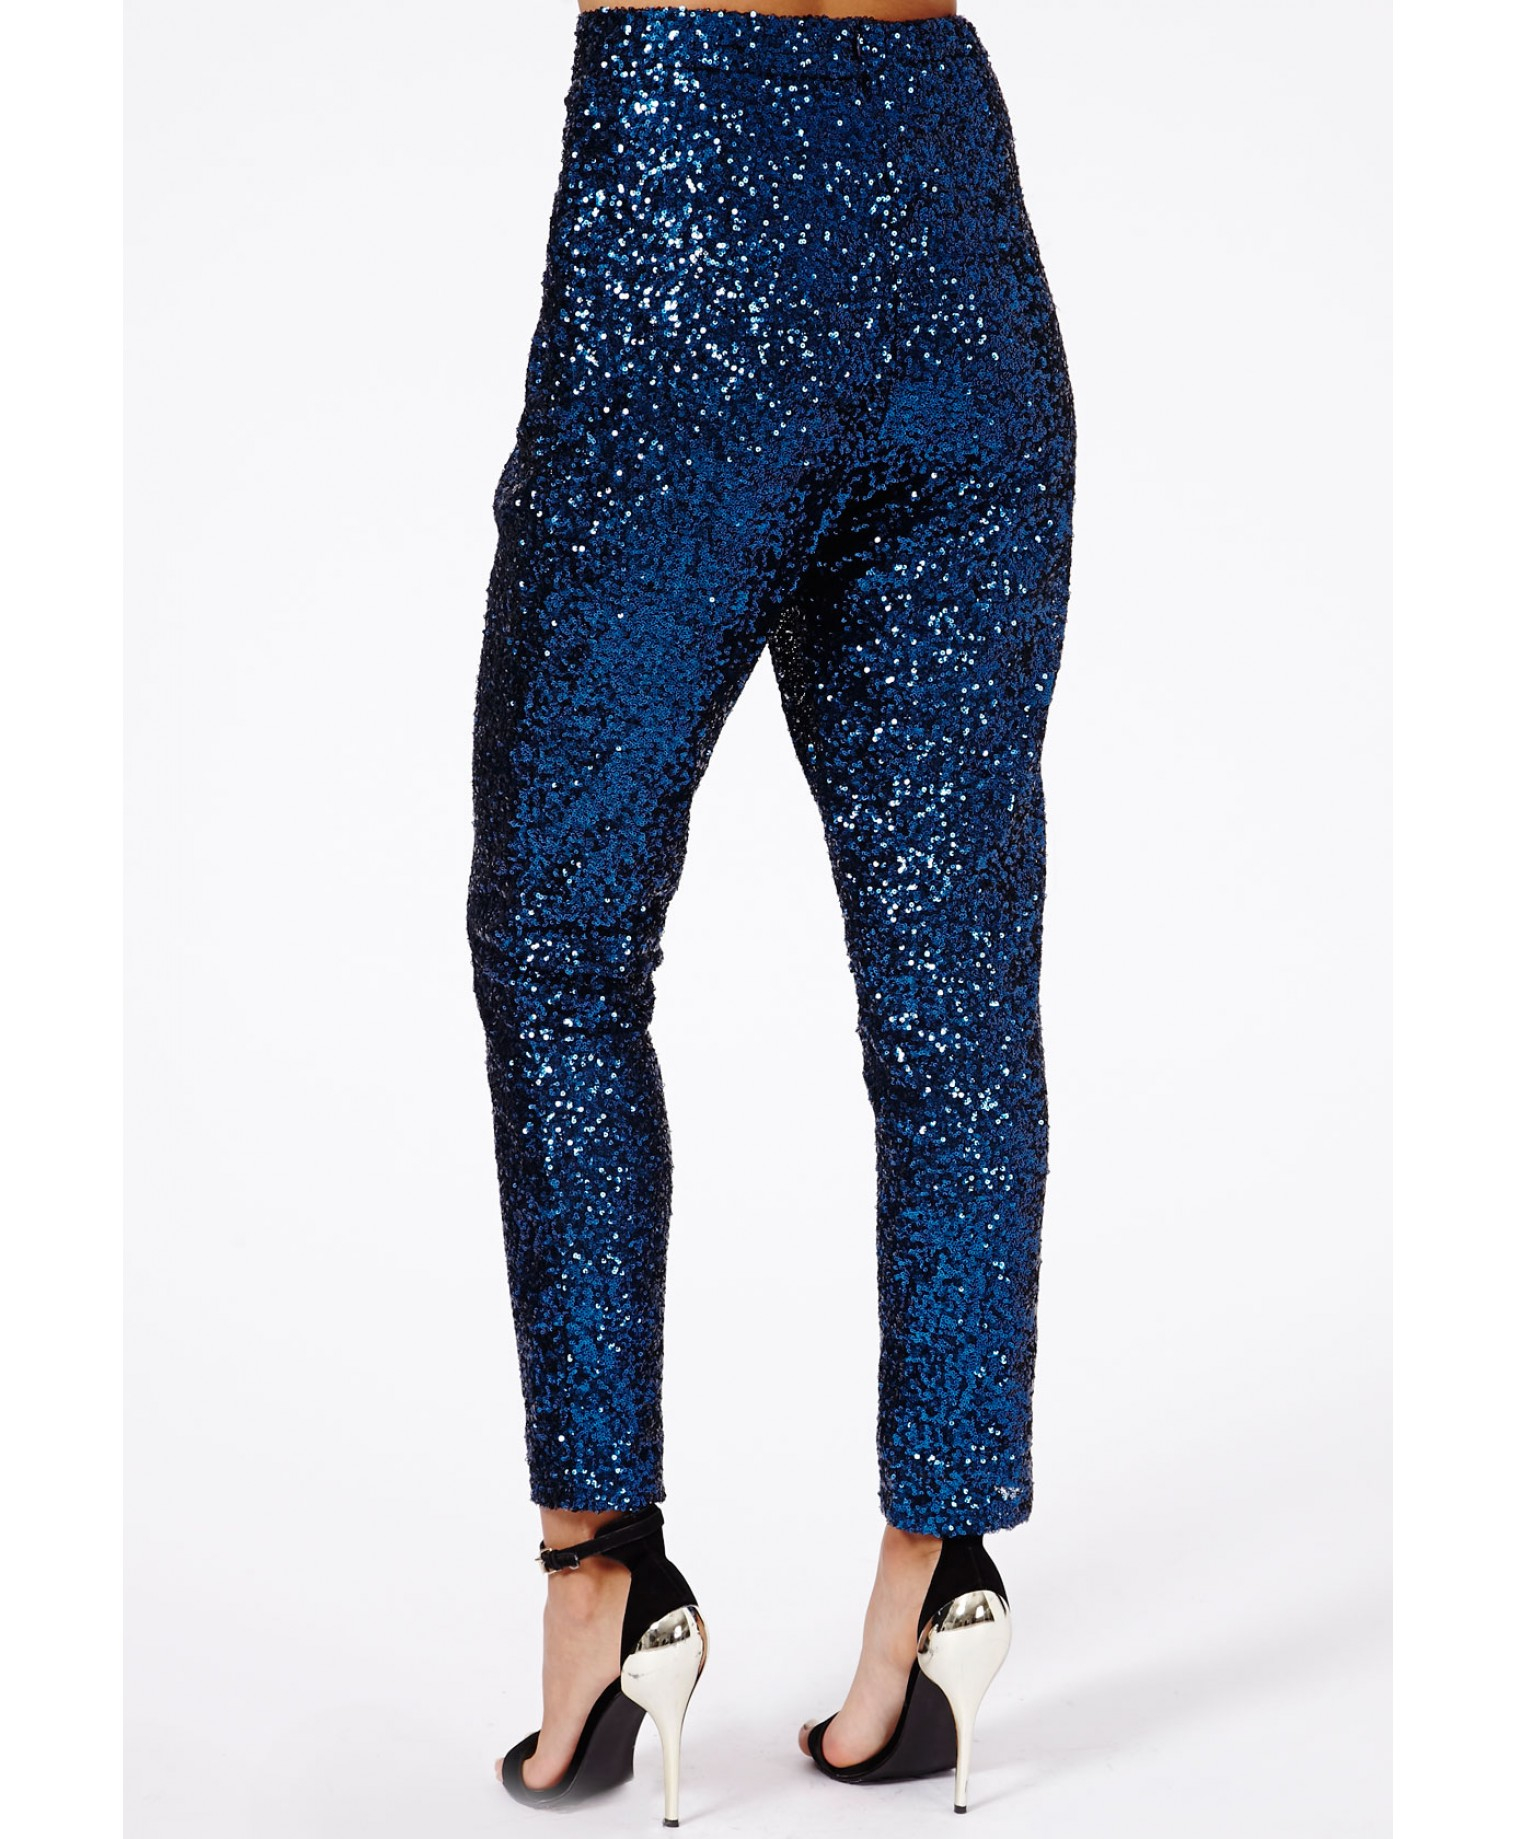 Missguided Blanid Sequin Trousers in Navy in Blue - Lyst